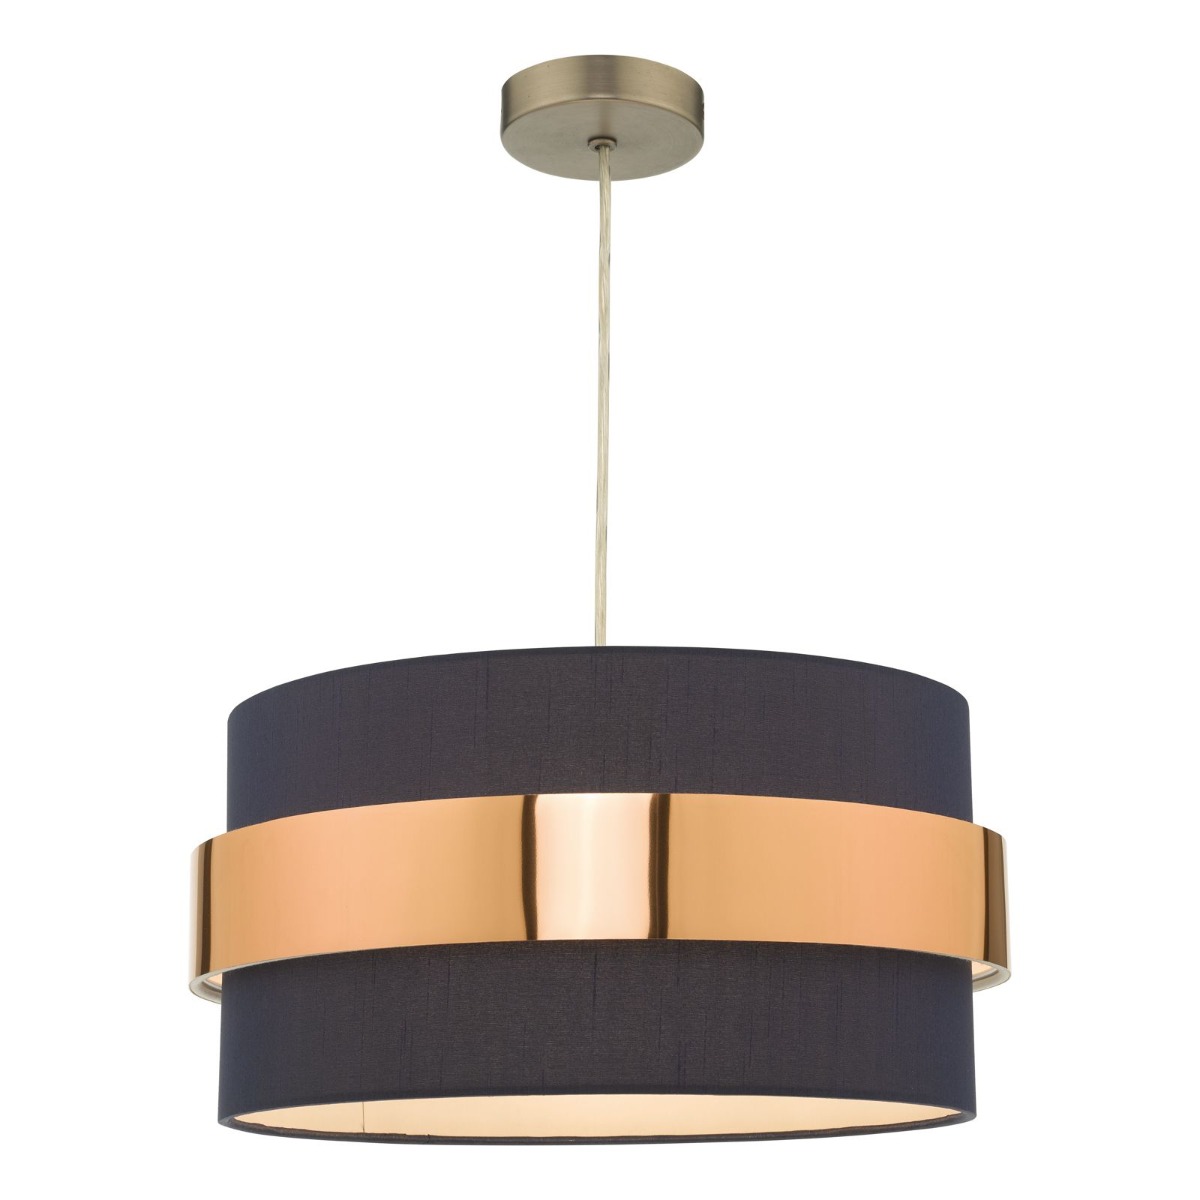 Image of Dar Wisebuys Oki Easy Fit Ceiling Pendant In Navy Blue And Copper